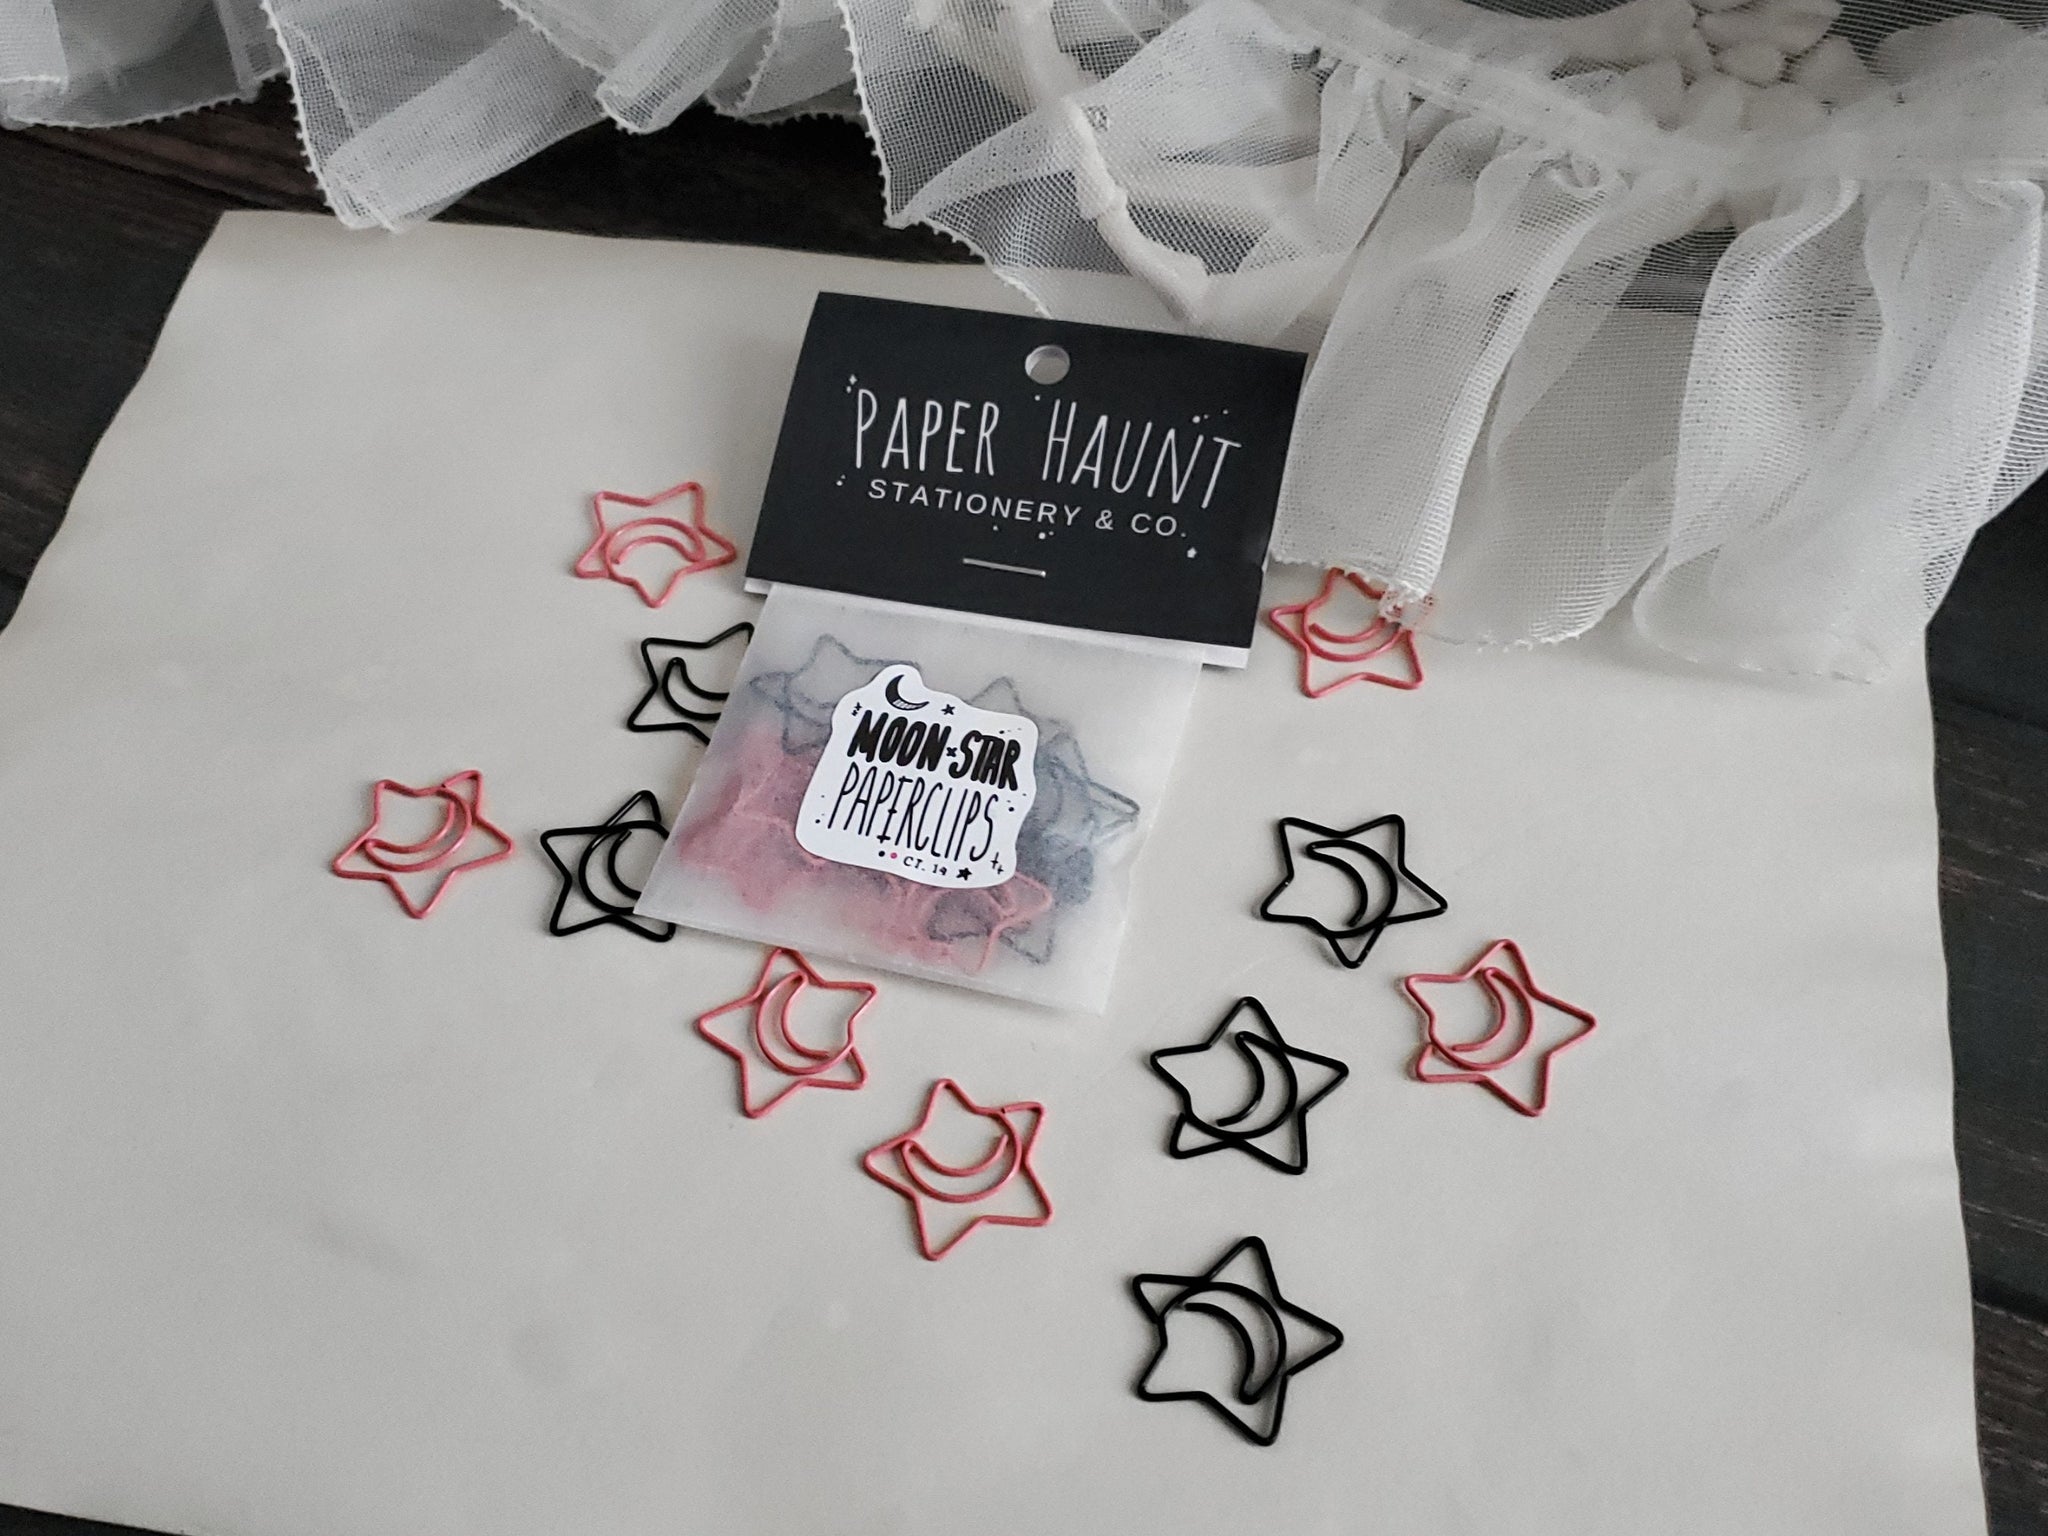 Pink and black Moon Star paperclips